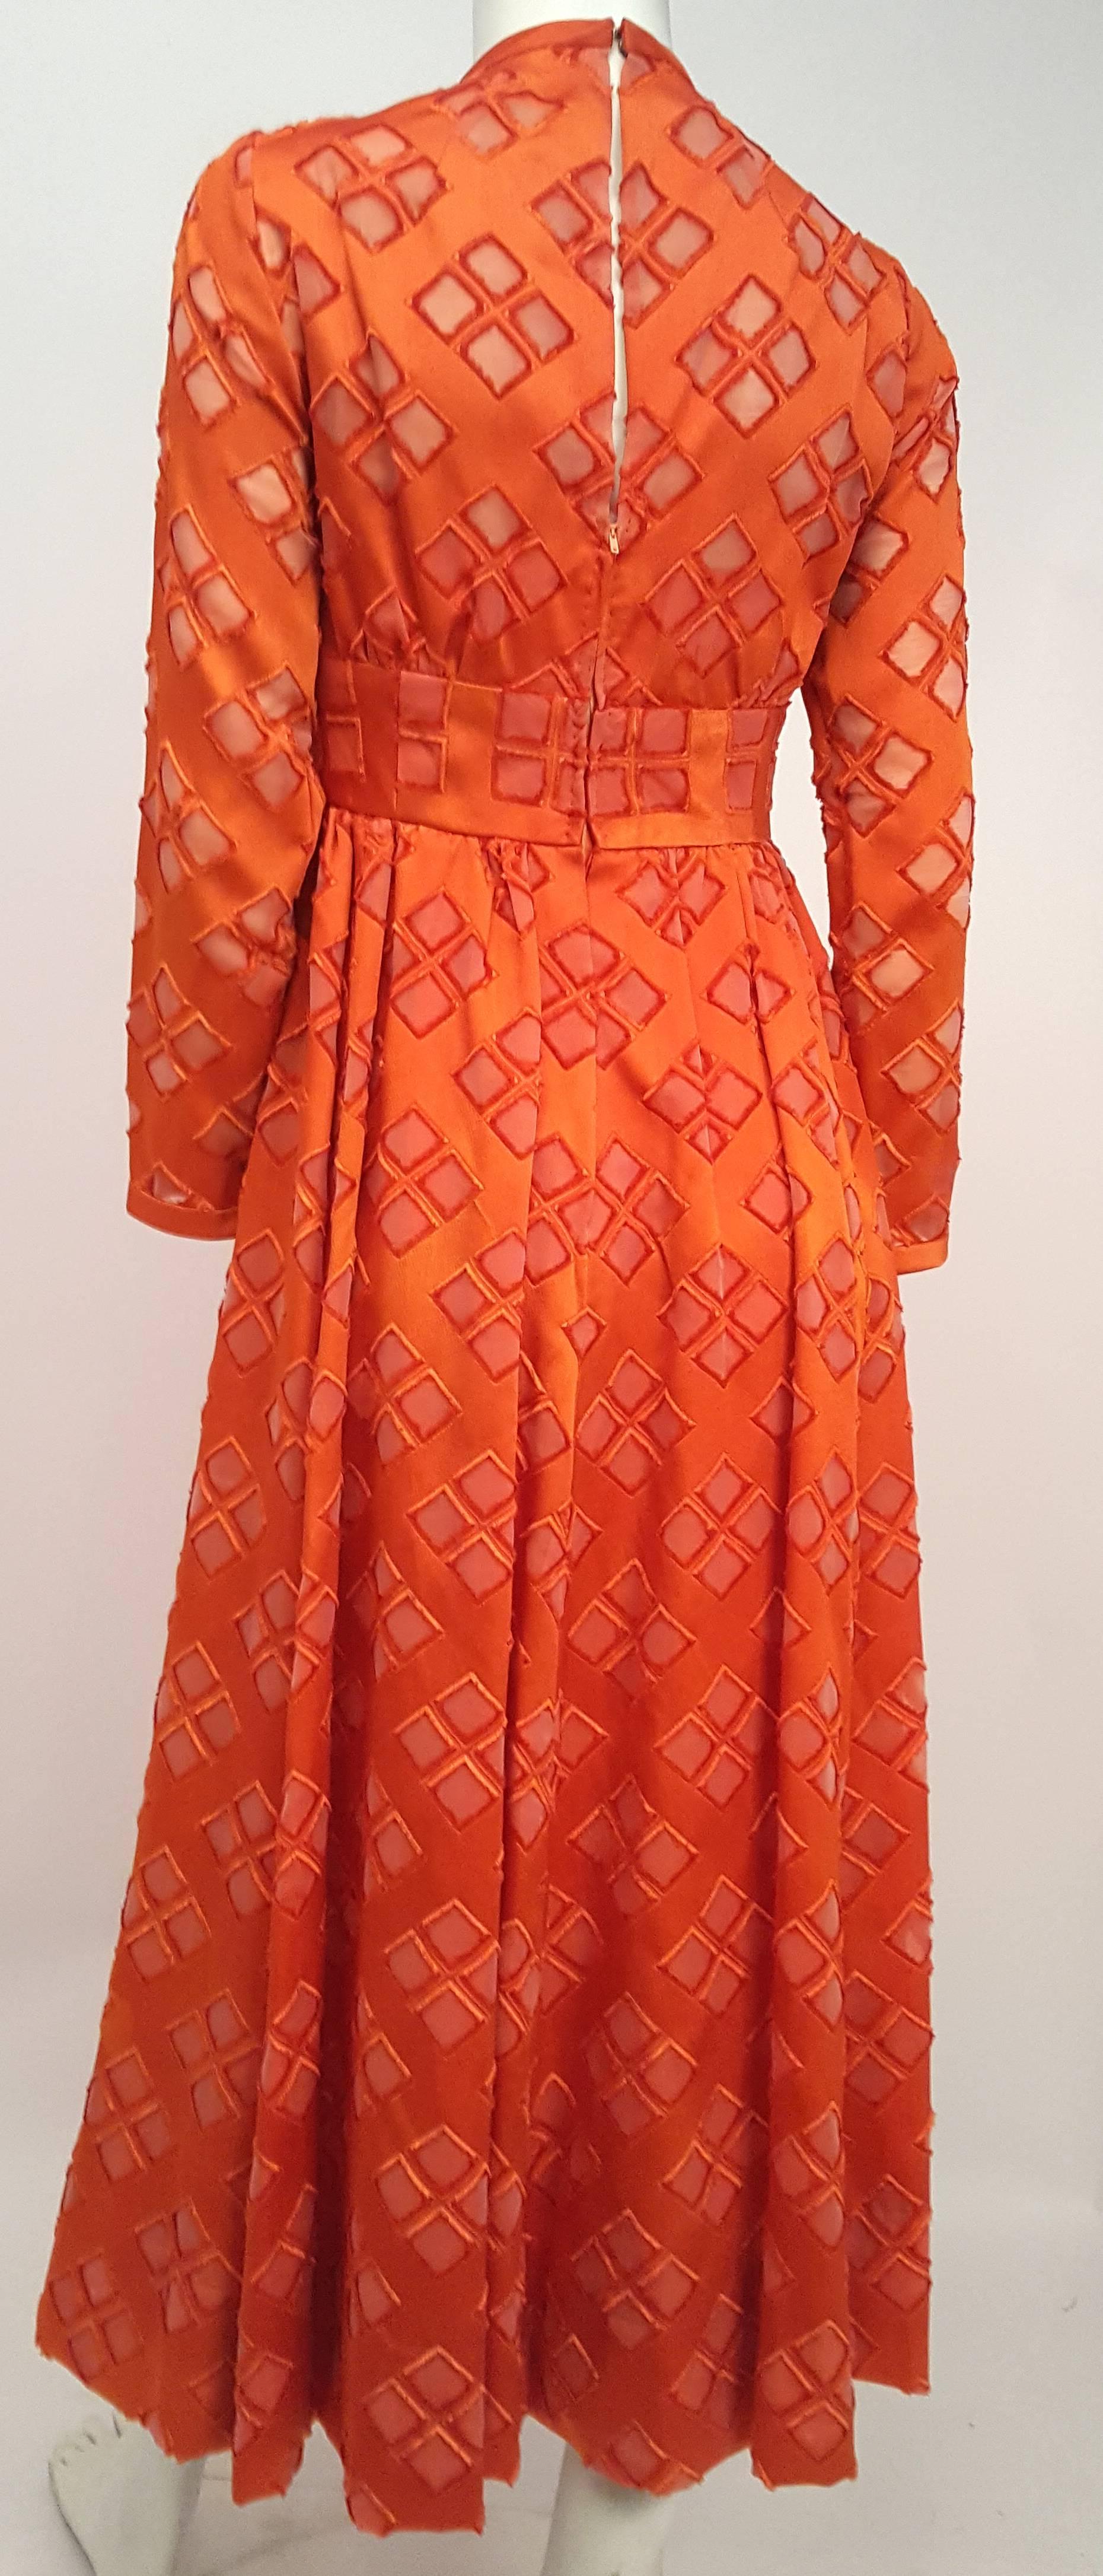 70s Malcolm Starr Orange Cutout Illusion Mesh Dress. Outer layer consists of orange jersey with diamond cutouts over nude illusion mesh, with sweetheart neckline bodice lining. Back zip closure and hook and eye closure.